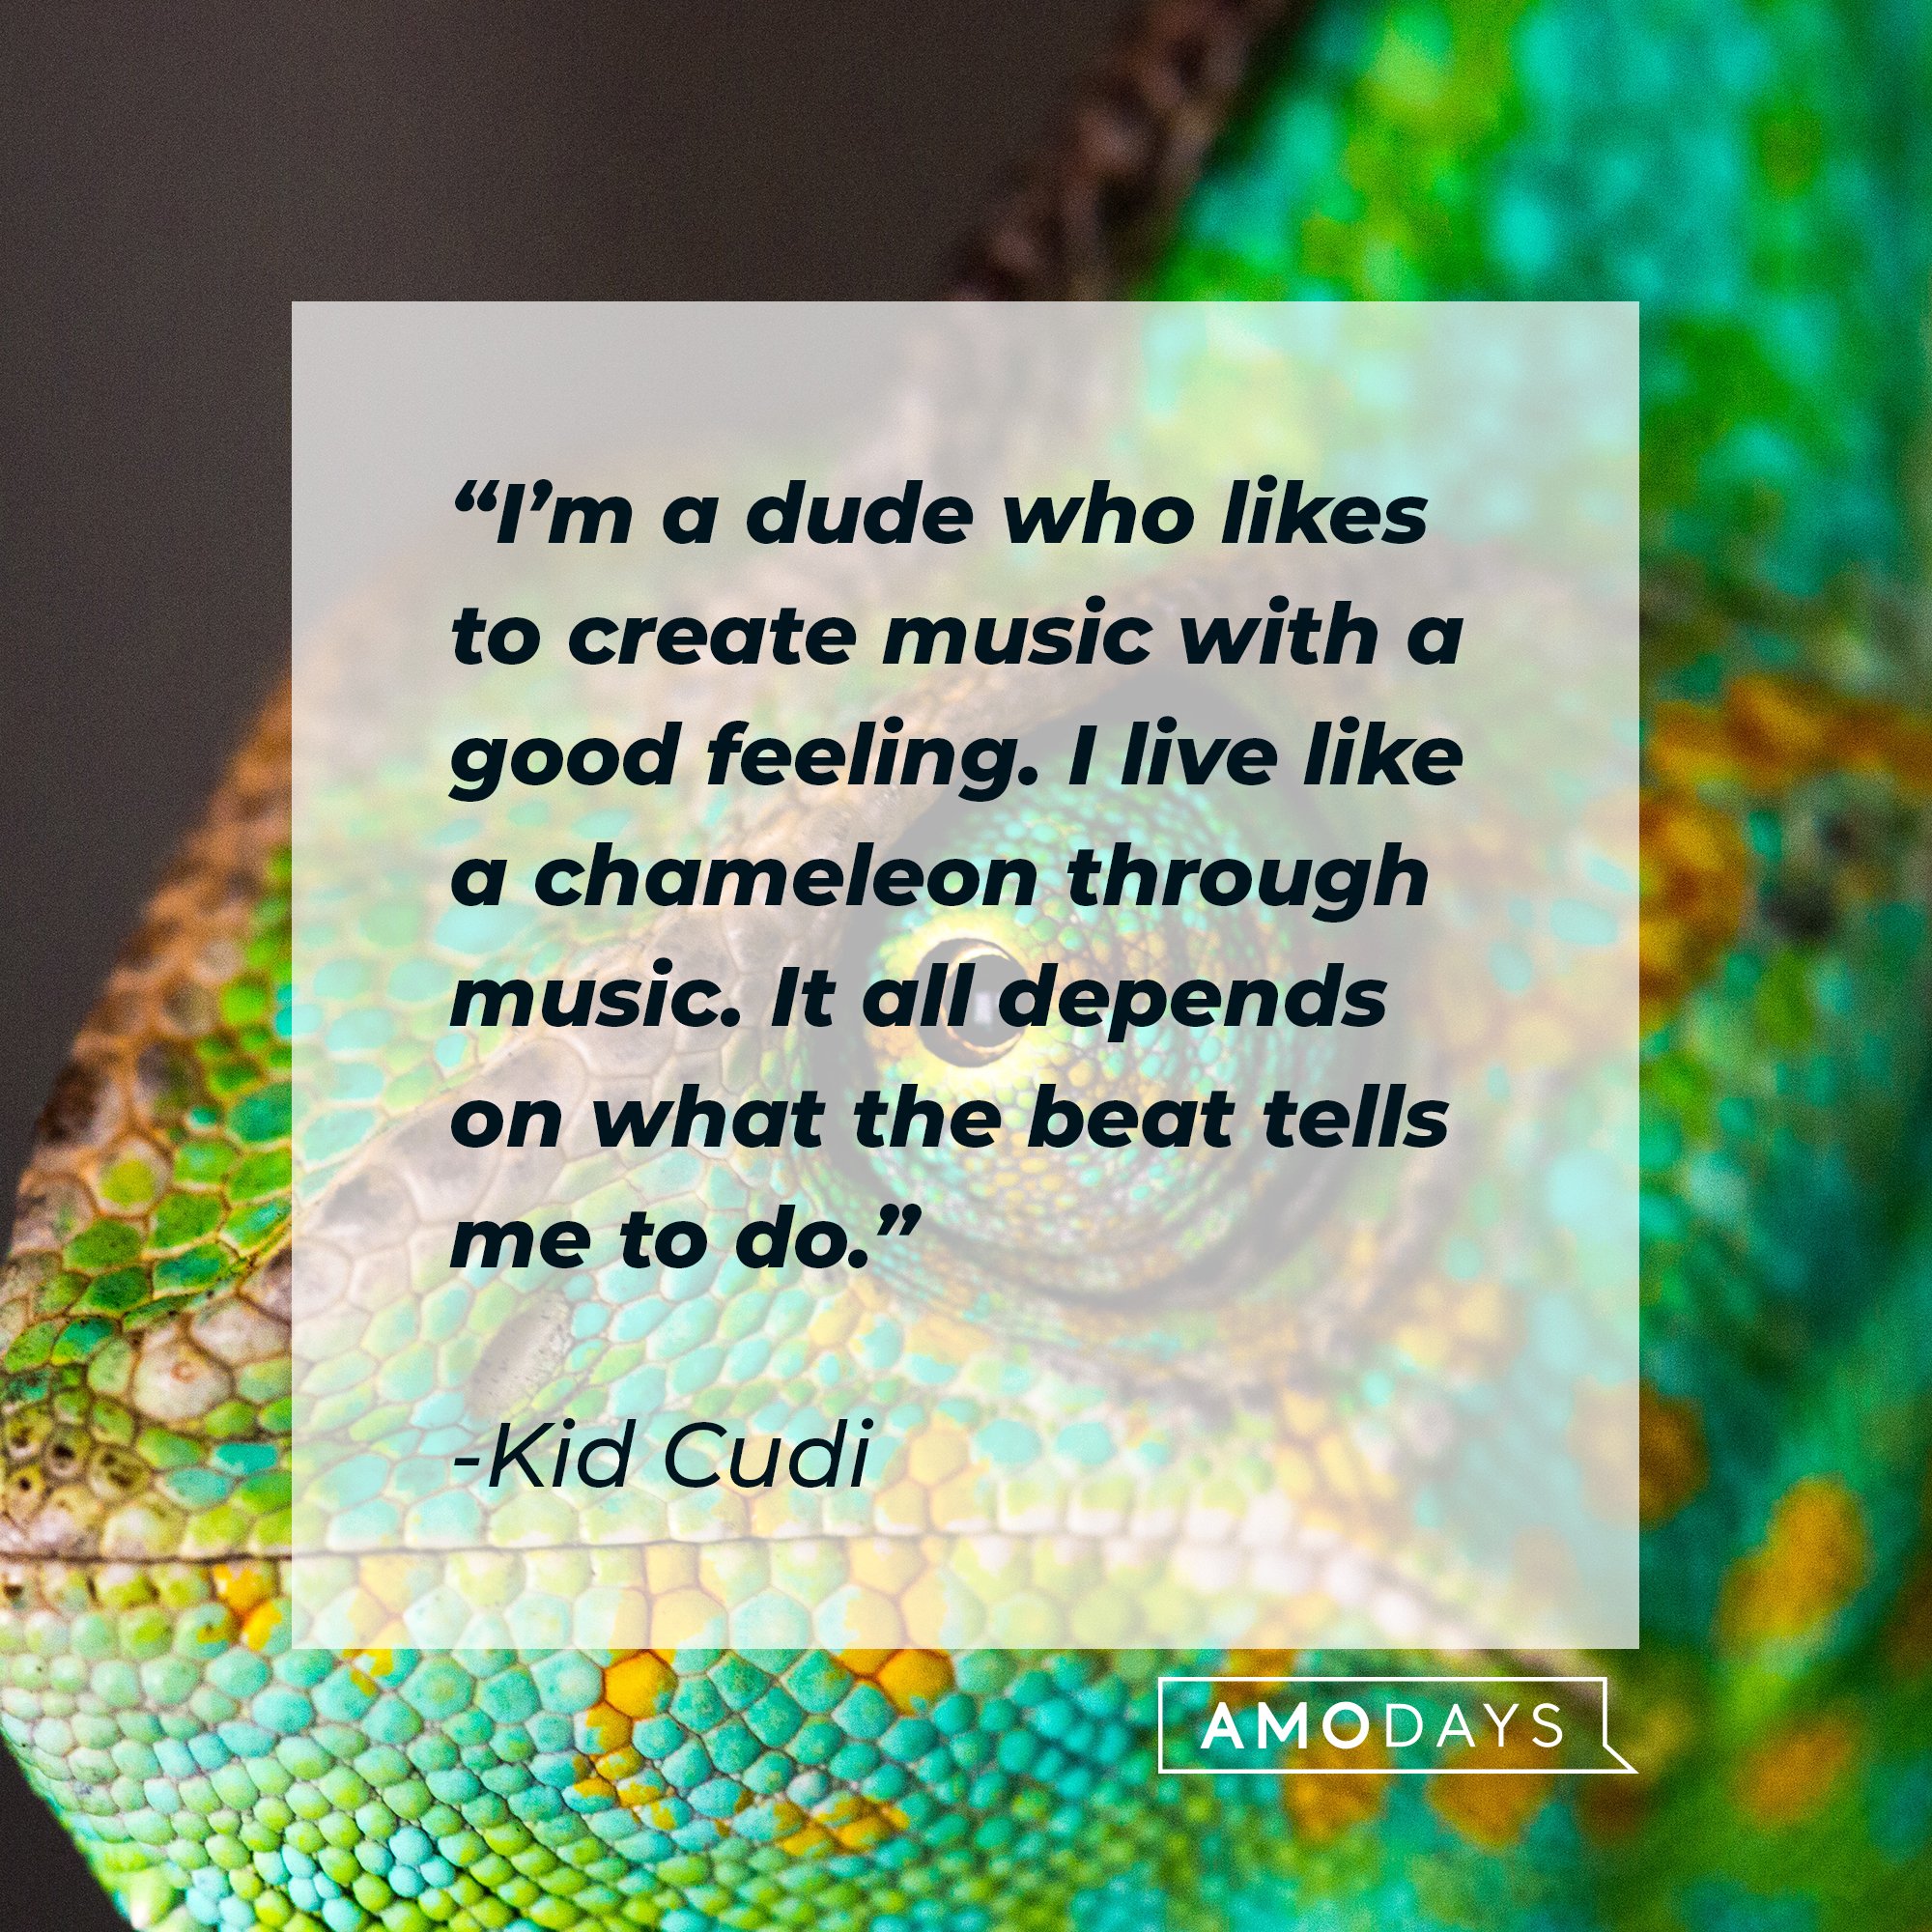 Kid Cudi’s quote: “I’m a dude who likes to create music with a good feeling. I live like a chameleon through music. It all depends on what the beat tells me to do.” | Image: AmoDays 